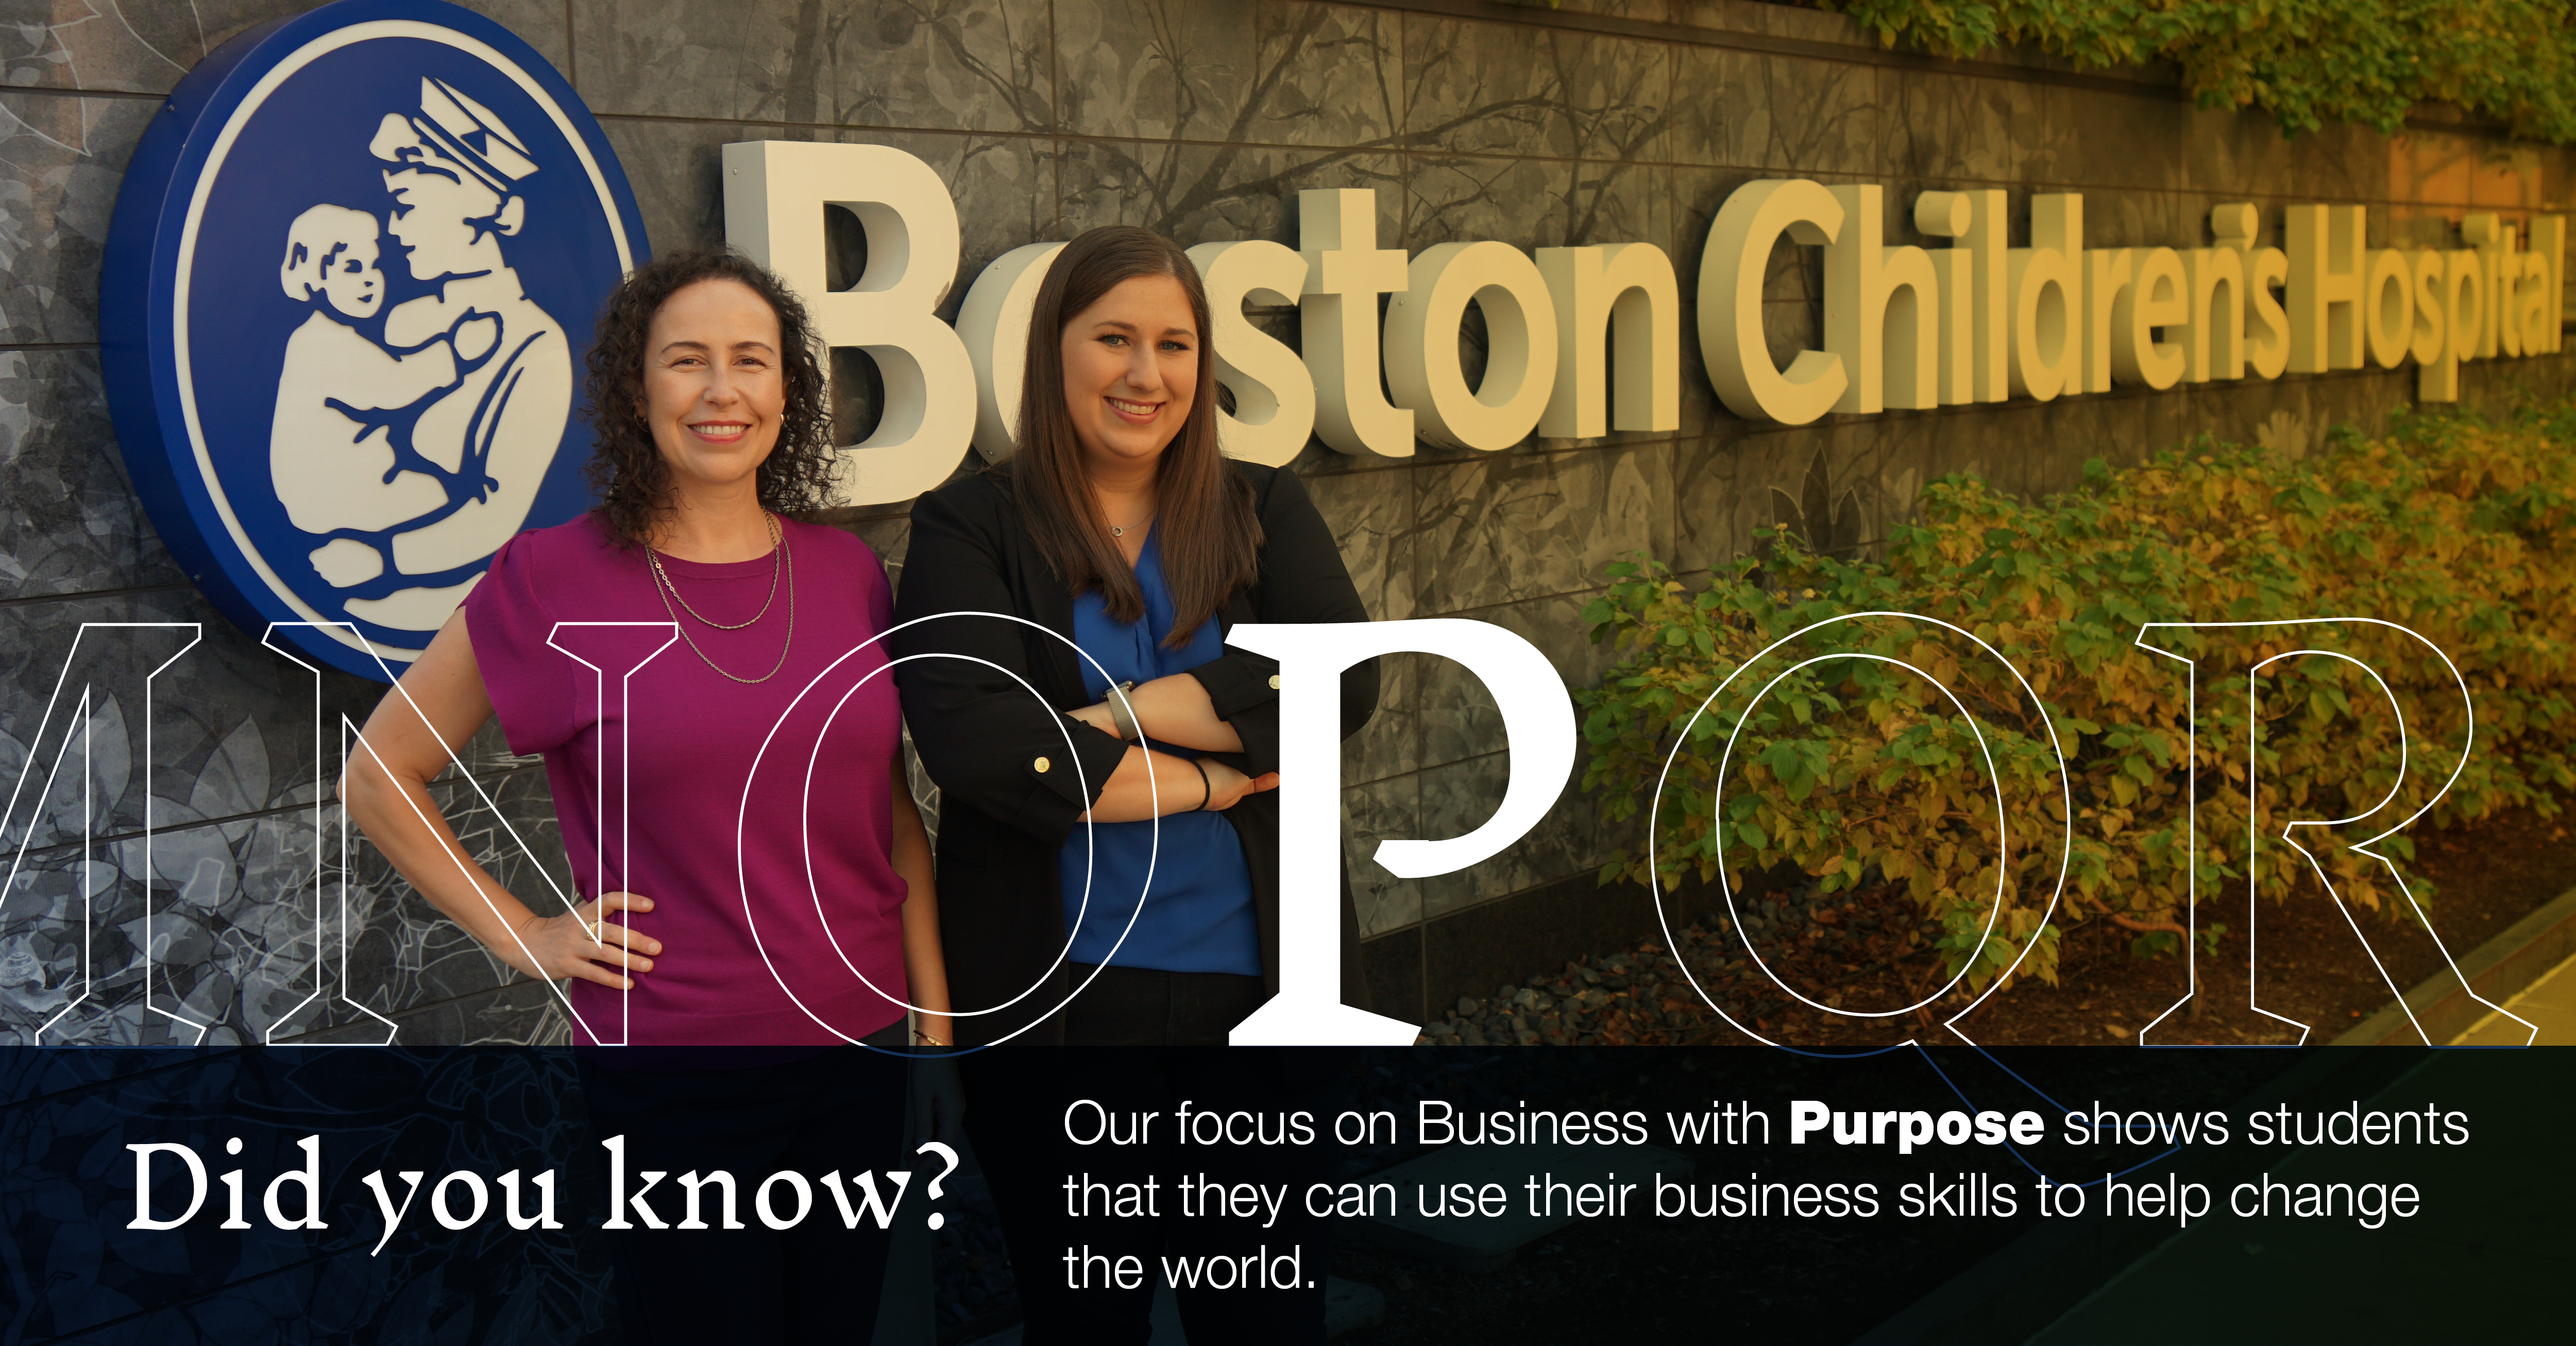 P: [image of two graduate students standing by the Boston Children's Hospital sign]: Did you know our focus on Business With Purpose shows students they can use their business skills to help change the world.